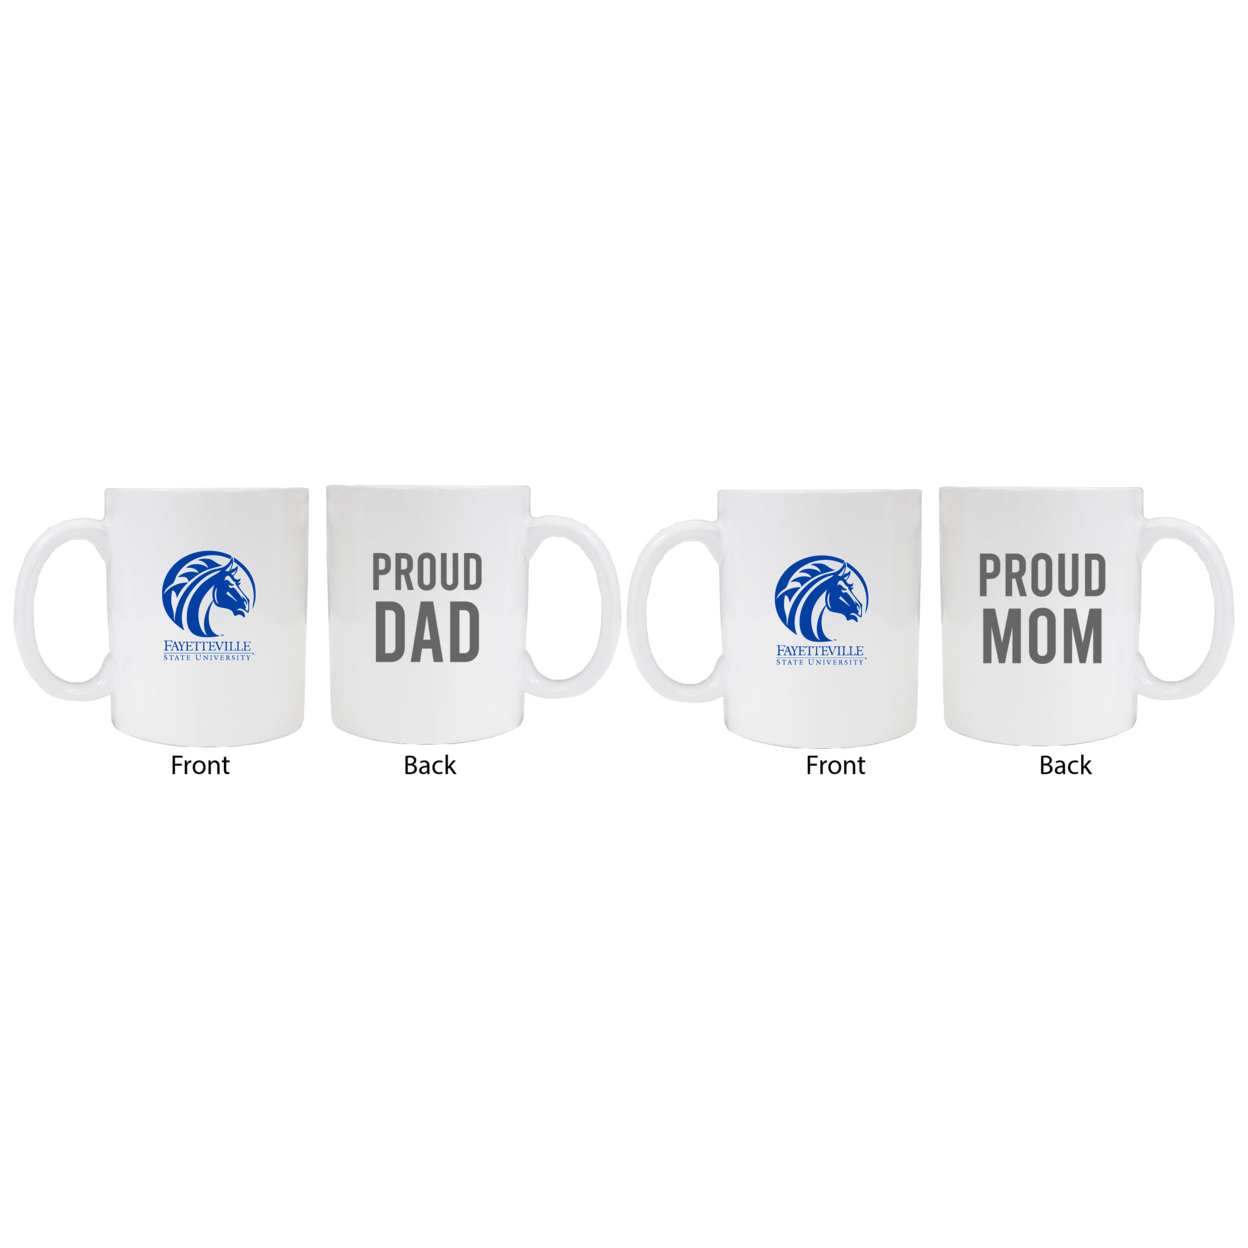 Fayetteville State University Proud Mom And Dad White Ceramic Coffee Mug 2 Pack (White).